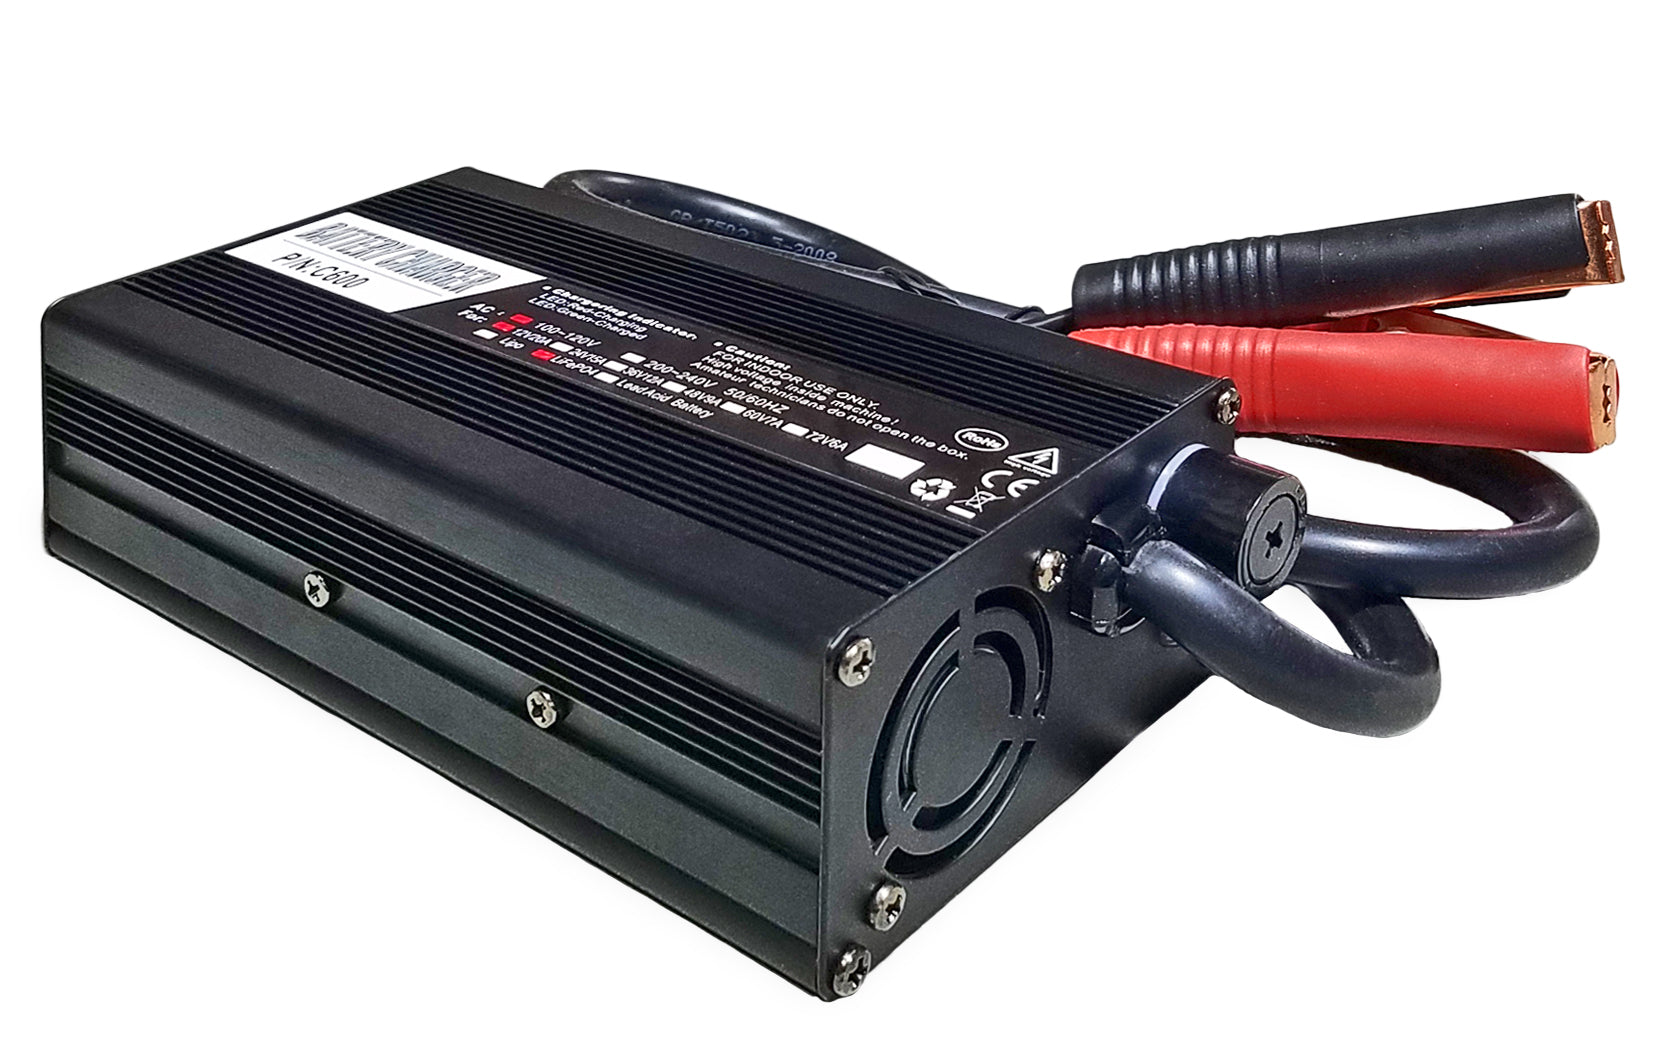 MillerTech 12V 20A Lithium Iron Phosphate Battery Charger (1220C) - LDSreliance